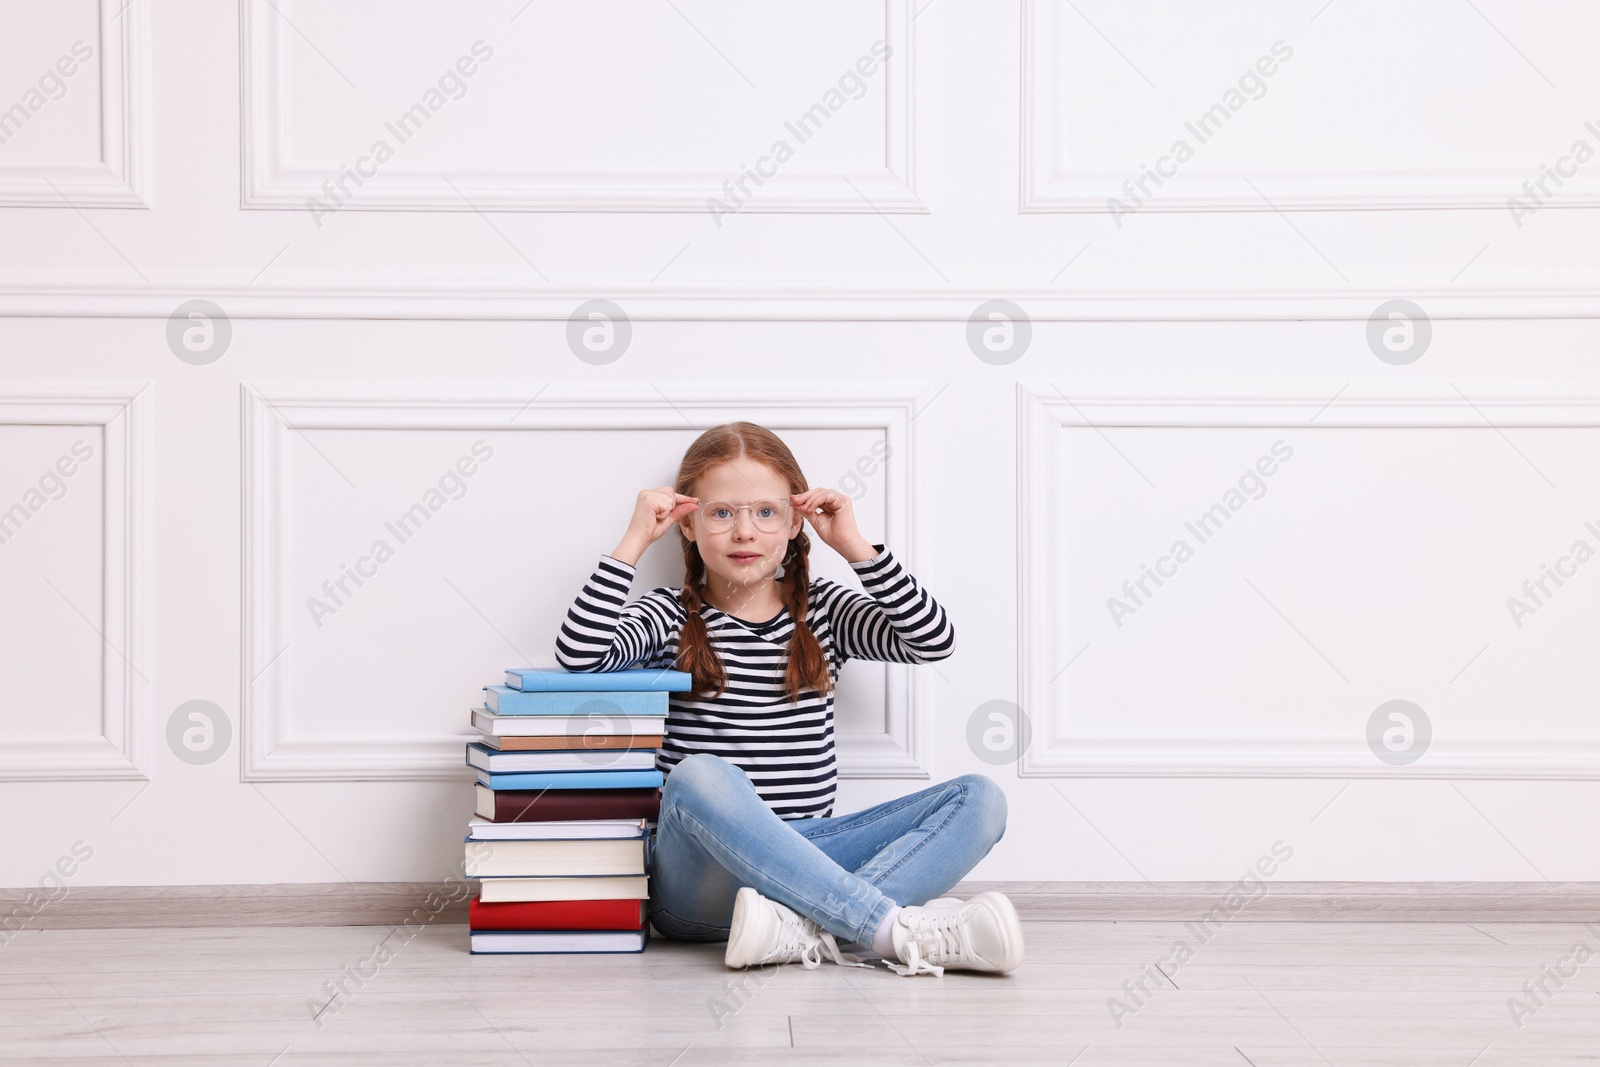 Photo of Cute girl sitting with stack of books indoors